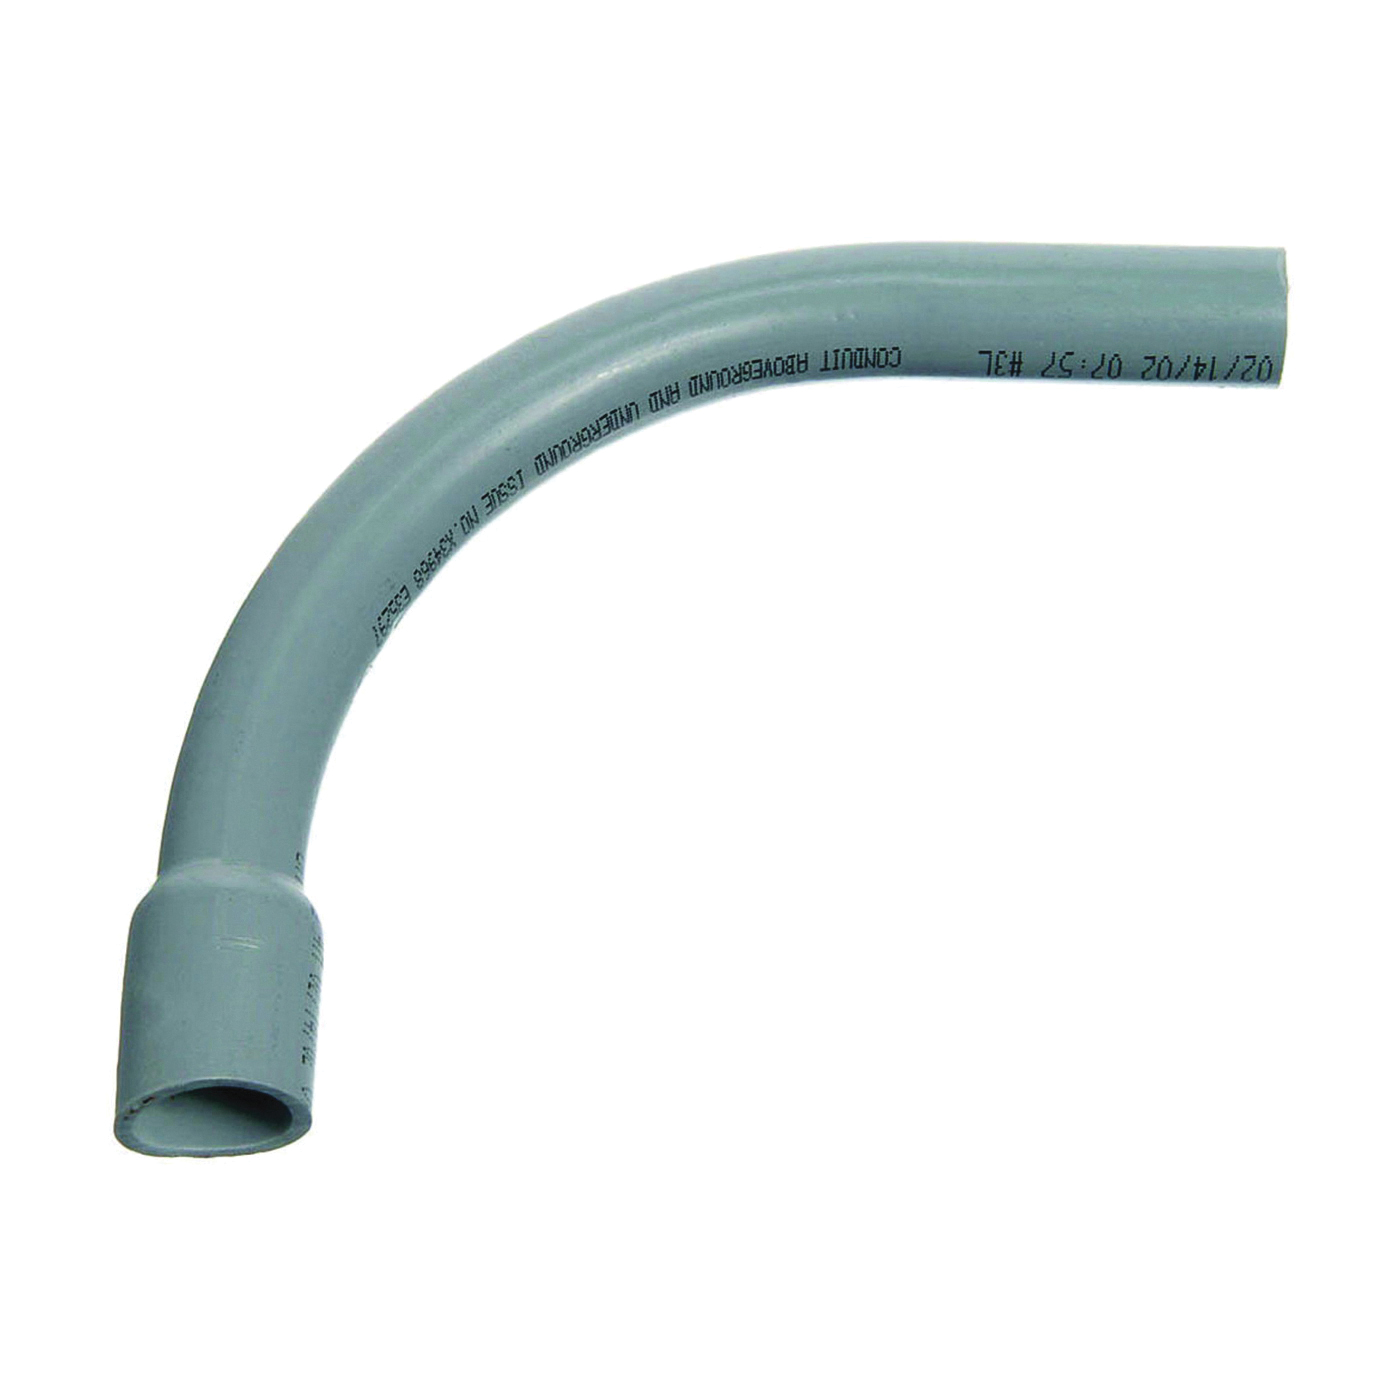 UA9AKB-CAR Elbow, 2-1/2 in Trade Size, 90 deg Angle, SCH 80 Schedule Rating, PVC, Bell End, Gray